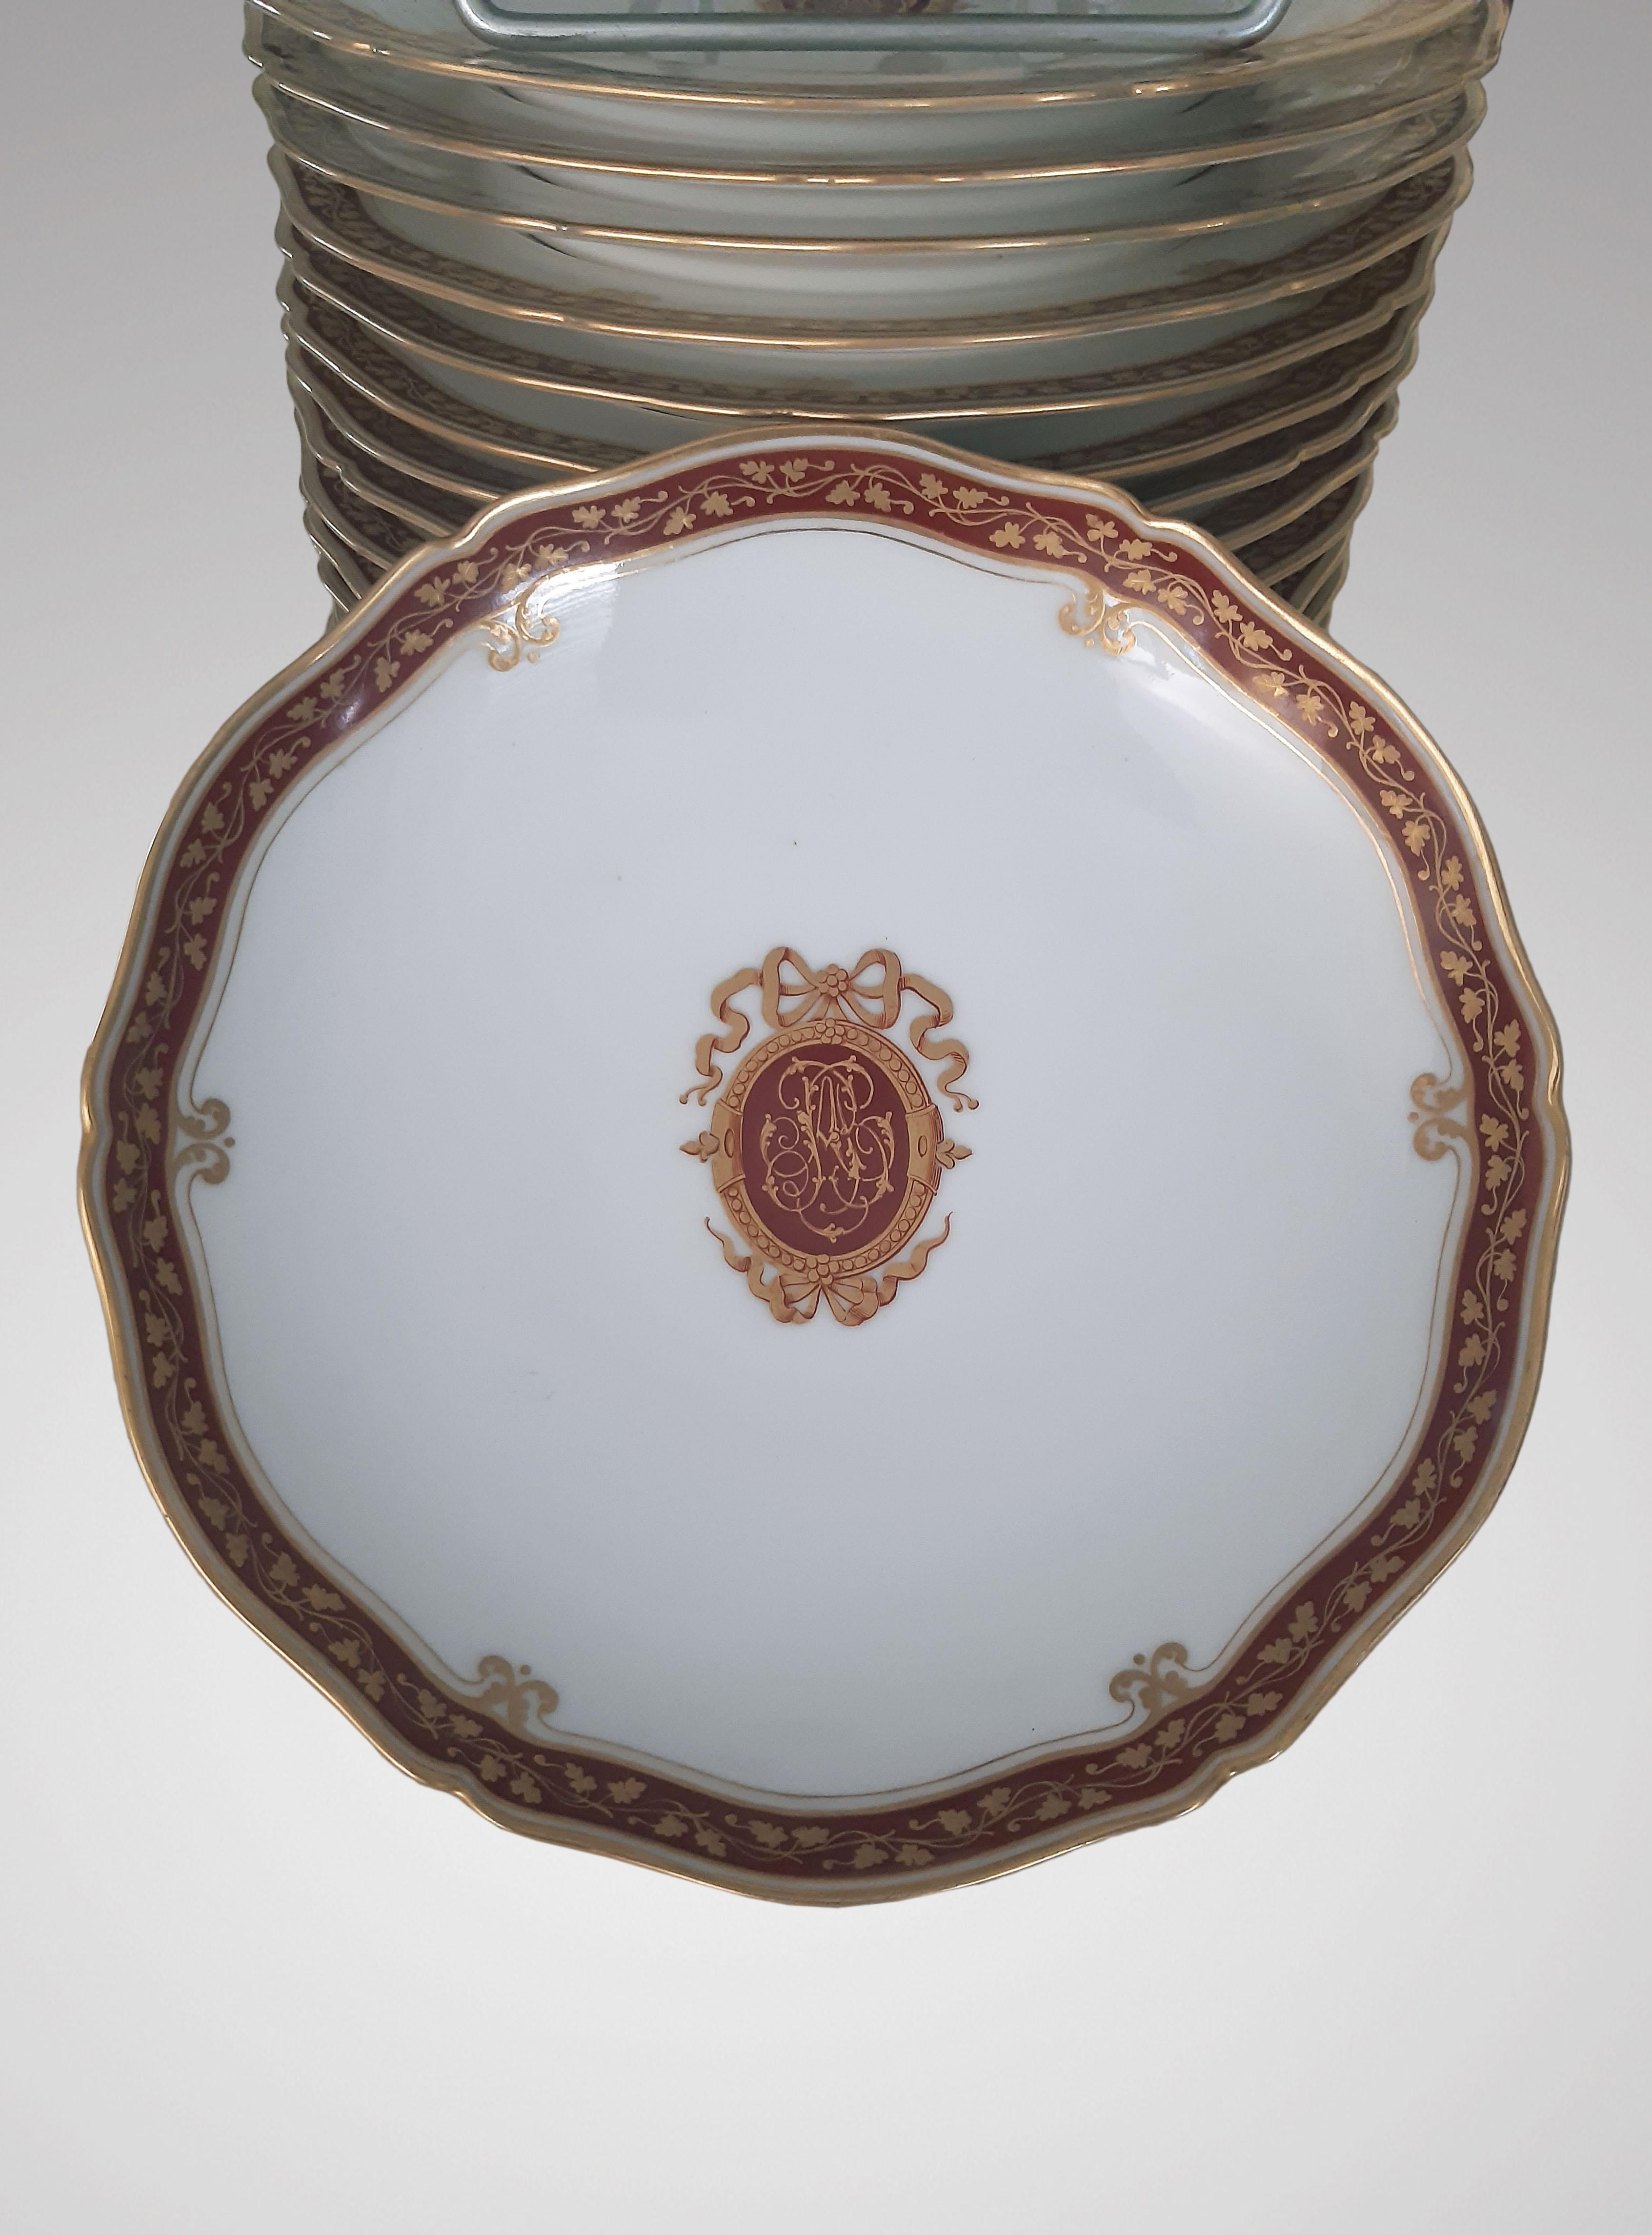 Le Rosey XI rue de la Paix Paris, dessert service in white porcelain with gold decoration on a brown background with a monogram surrounded by a ribbon in the center and a frieze of vine branches around the edge.
Comprising: 18 plates, two displays,